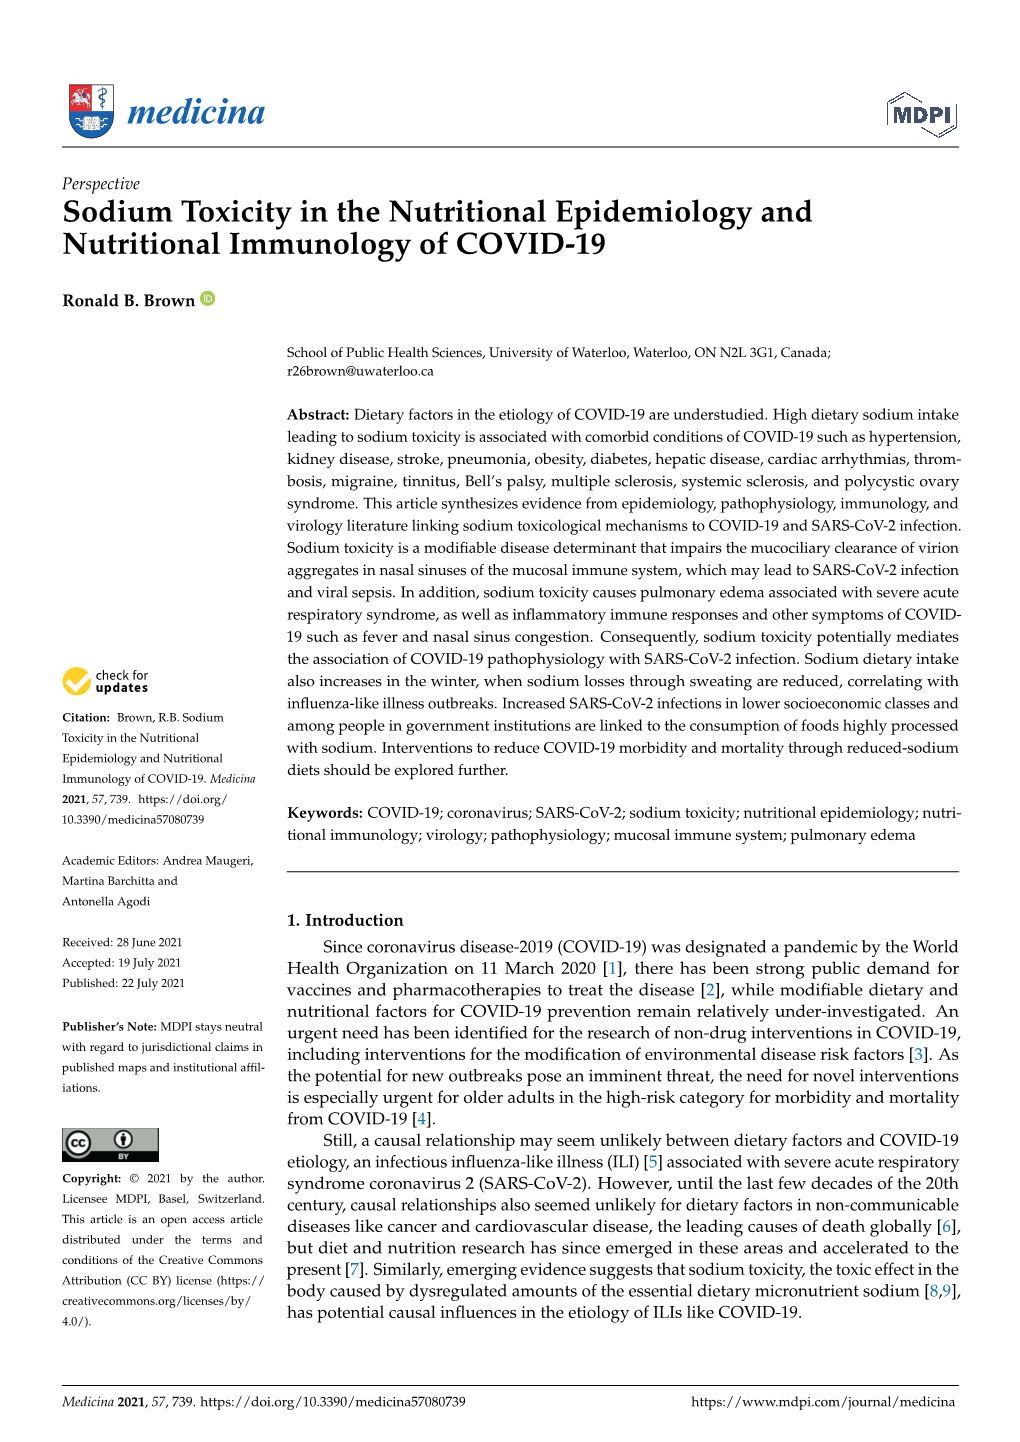 Sodium Toxicity in the Nutritional Epidemiology and Nutritional Immunology of COVID-19